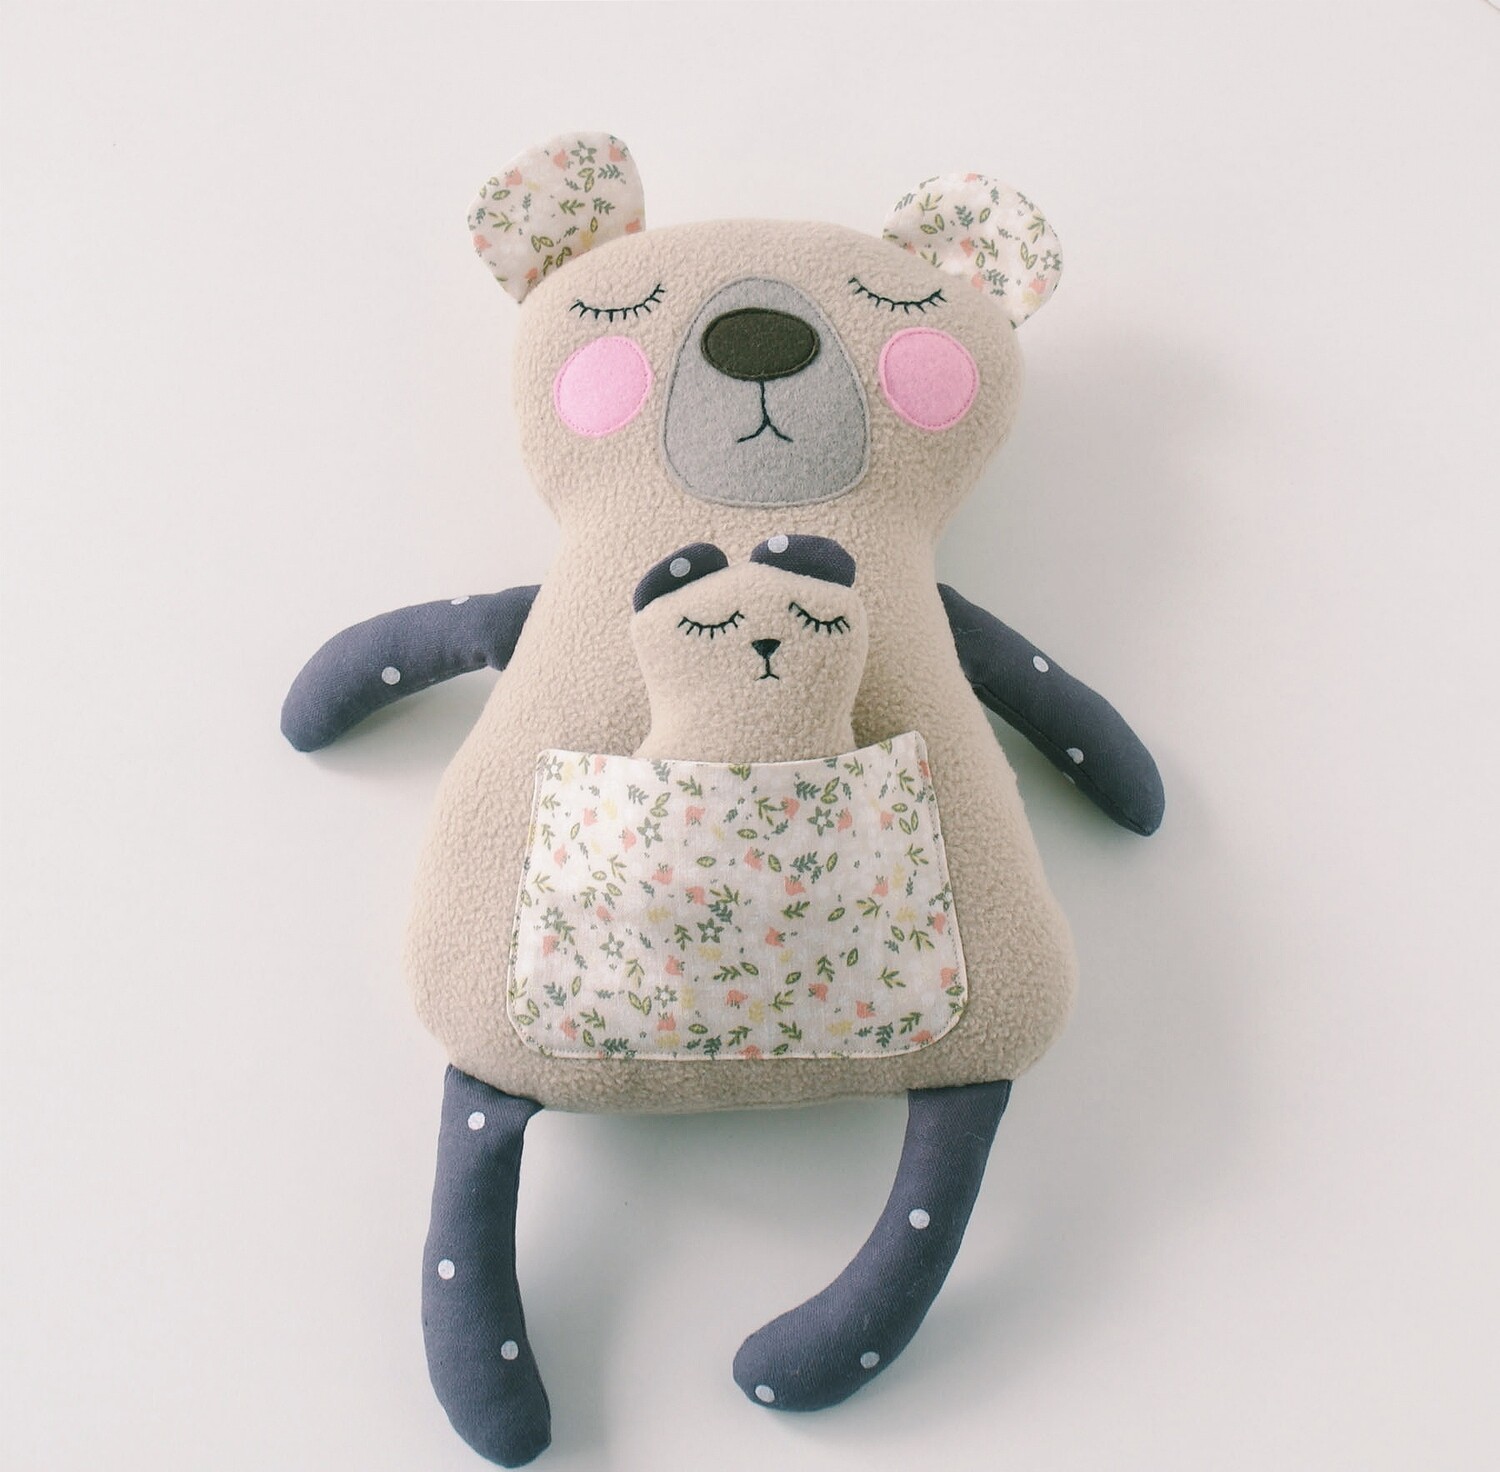 Bear with baby. Sewing pattern PDF